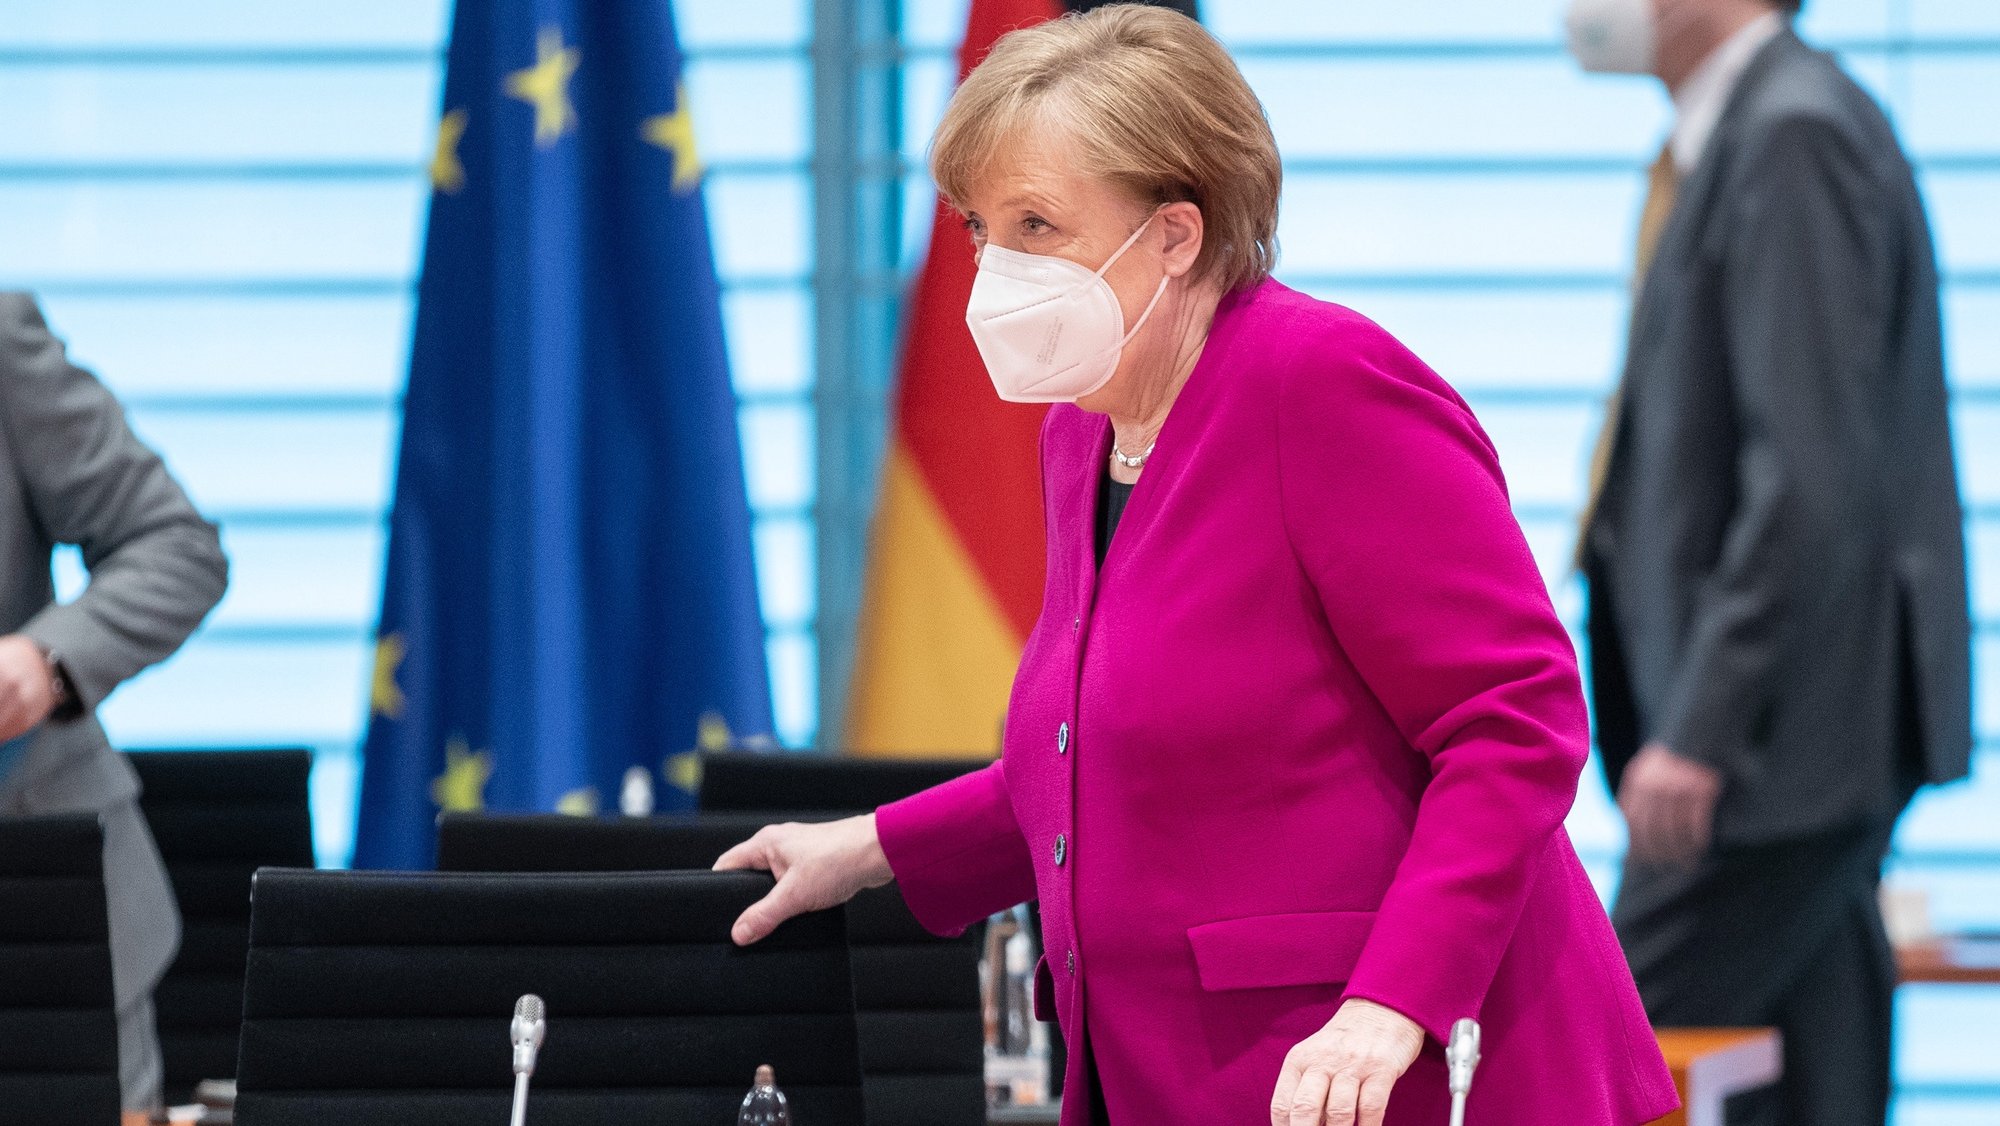 epa09108011 German Chancellor Angela Merkel wearing a face mask attends a cabinet meeting in Berlin, Germany, 31 March 2021.  EPA/ANDREAS GORA / POOL